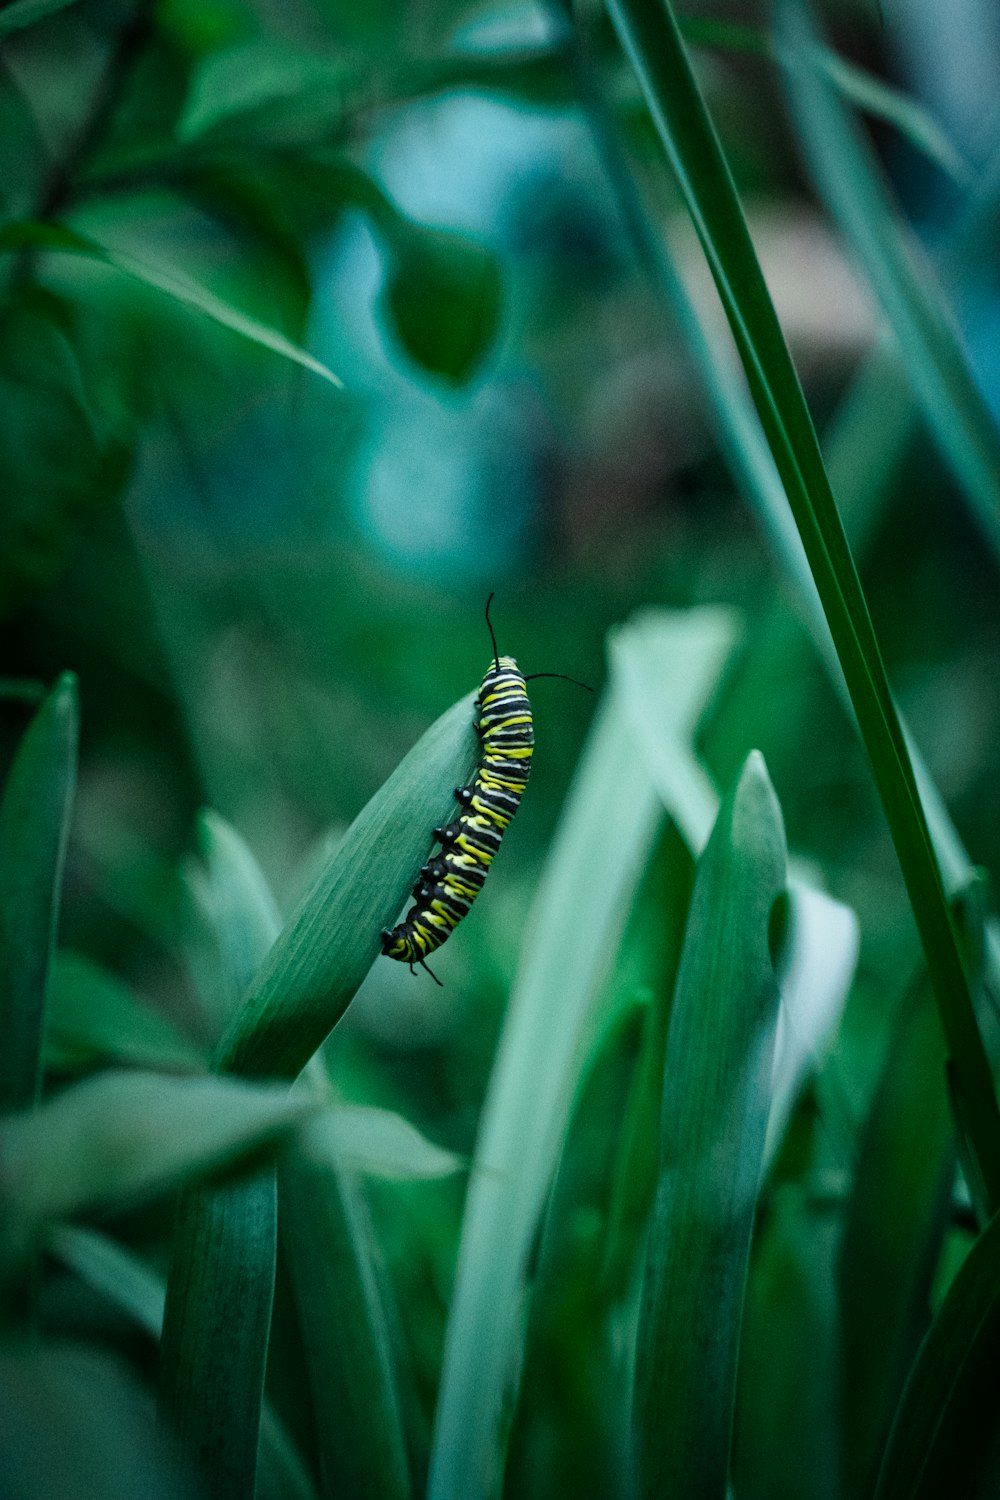 yellow and black caterpillar on green leaf